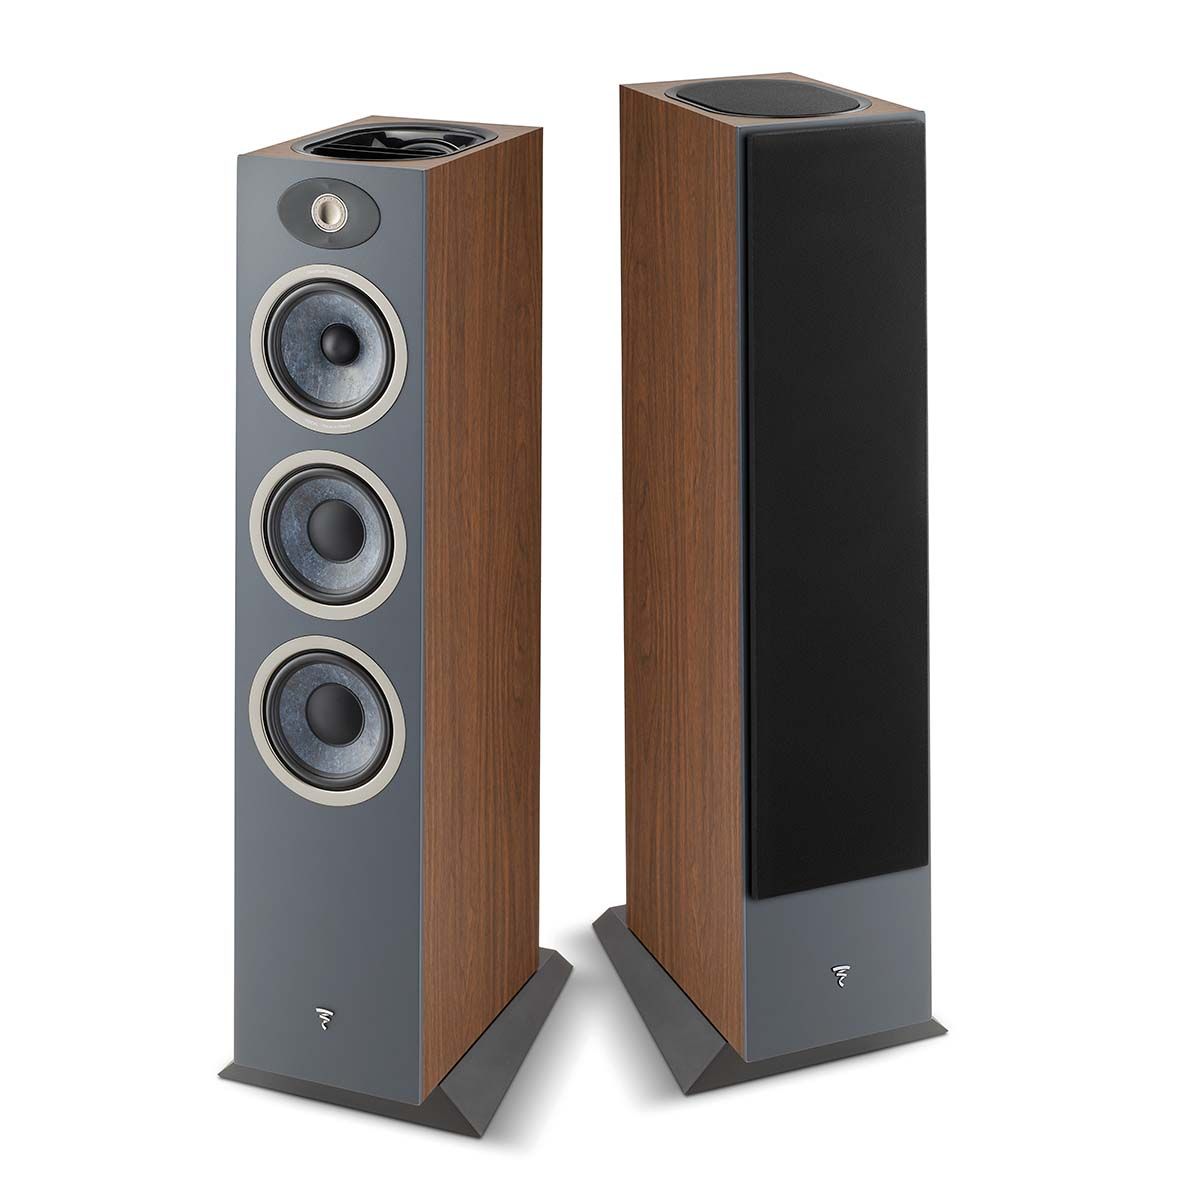 Focal Theva No3-D Floorstanding Speaker - Dark Wood - Each - view of pair, one with grilles, one without grilles